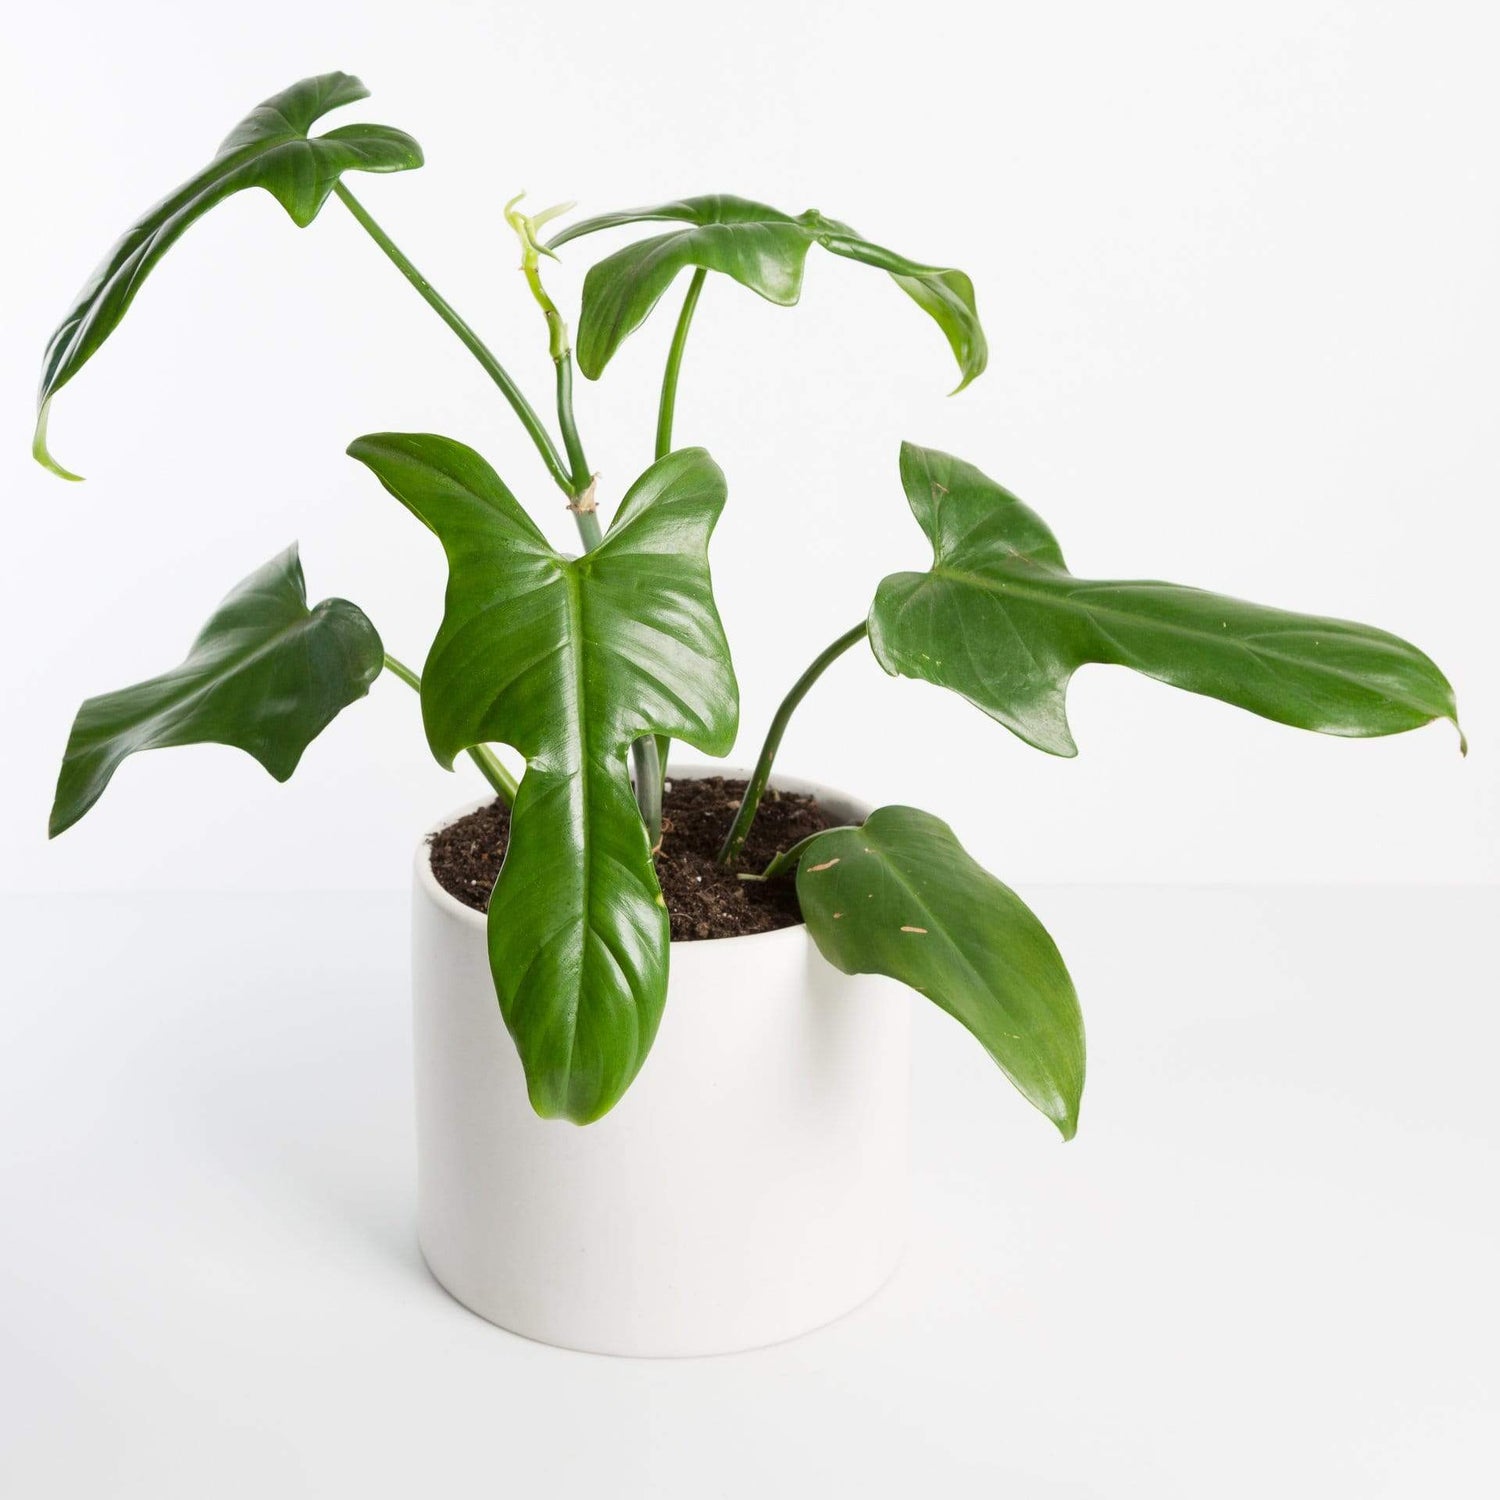 Urban Sprouts Rare Plant 6" in nursery pot Philodendron 'Horse Head'